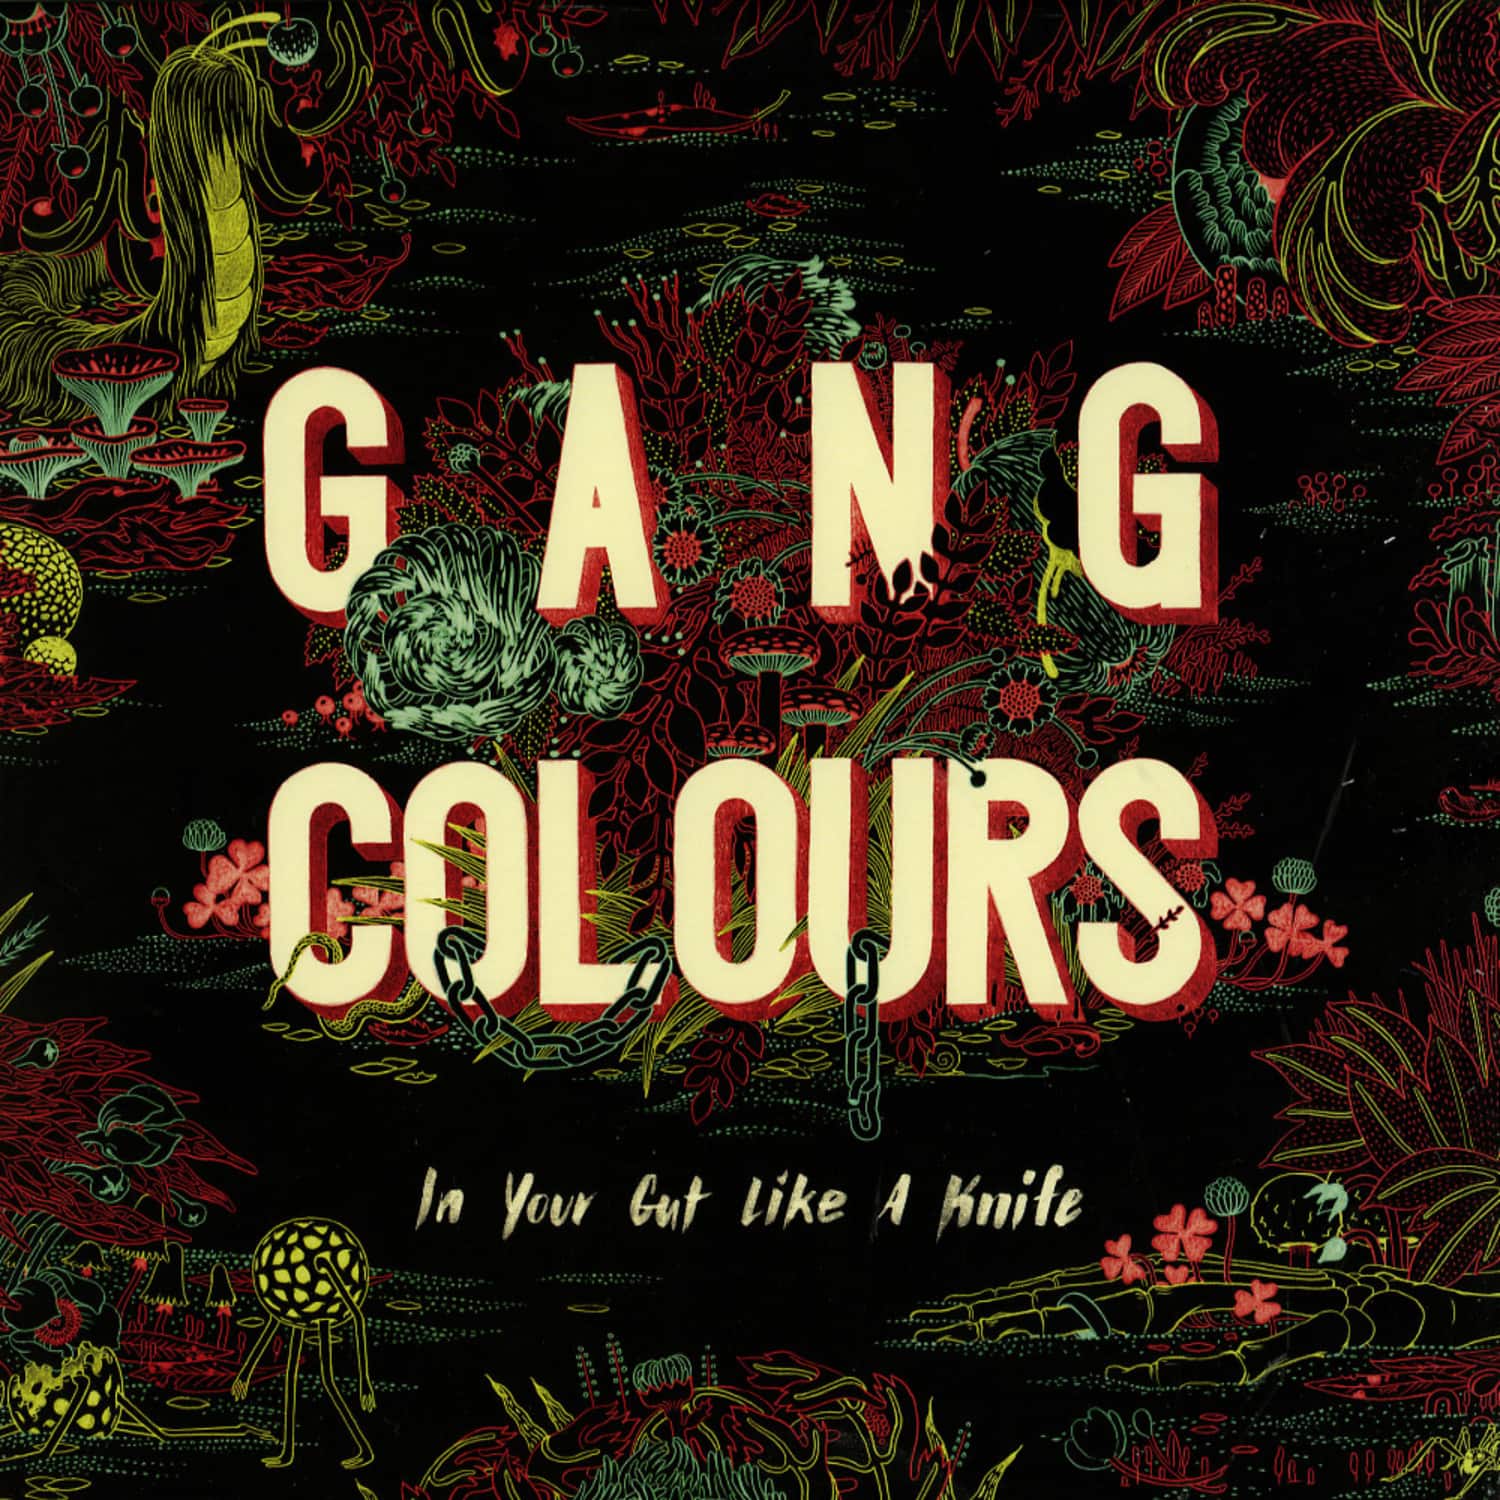 Gang Colours - IN YOUR GUT LIKE A KNIFE